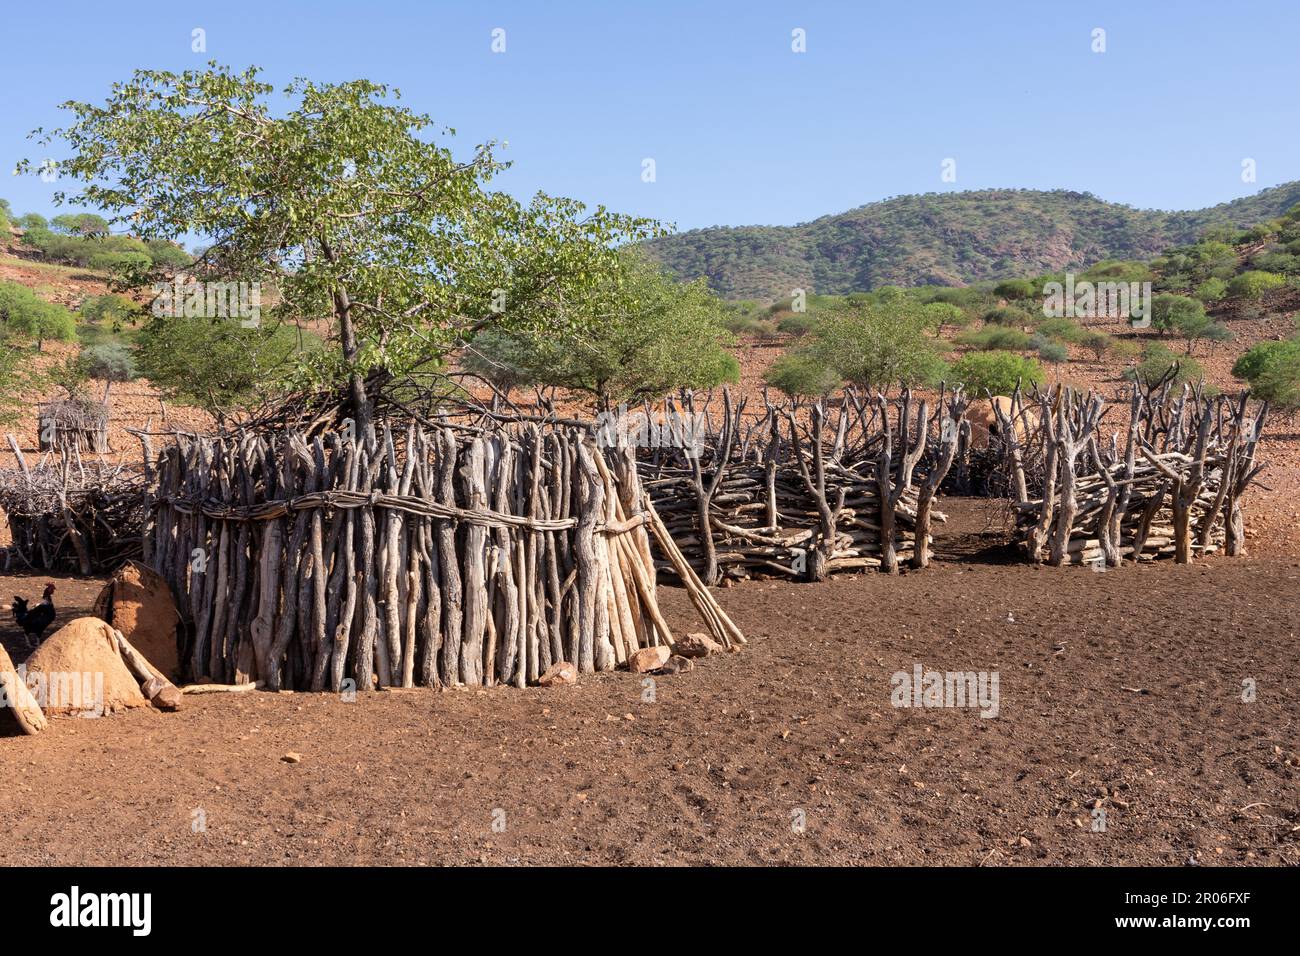 hut of Himba people in Namibia Stock Photo